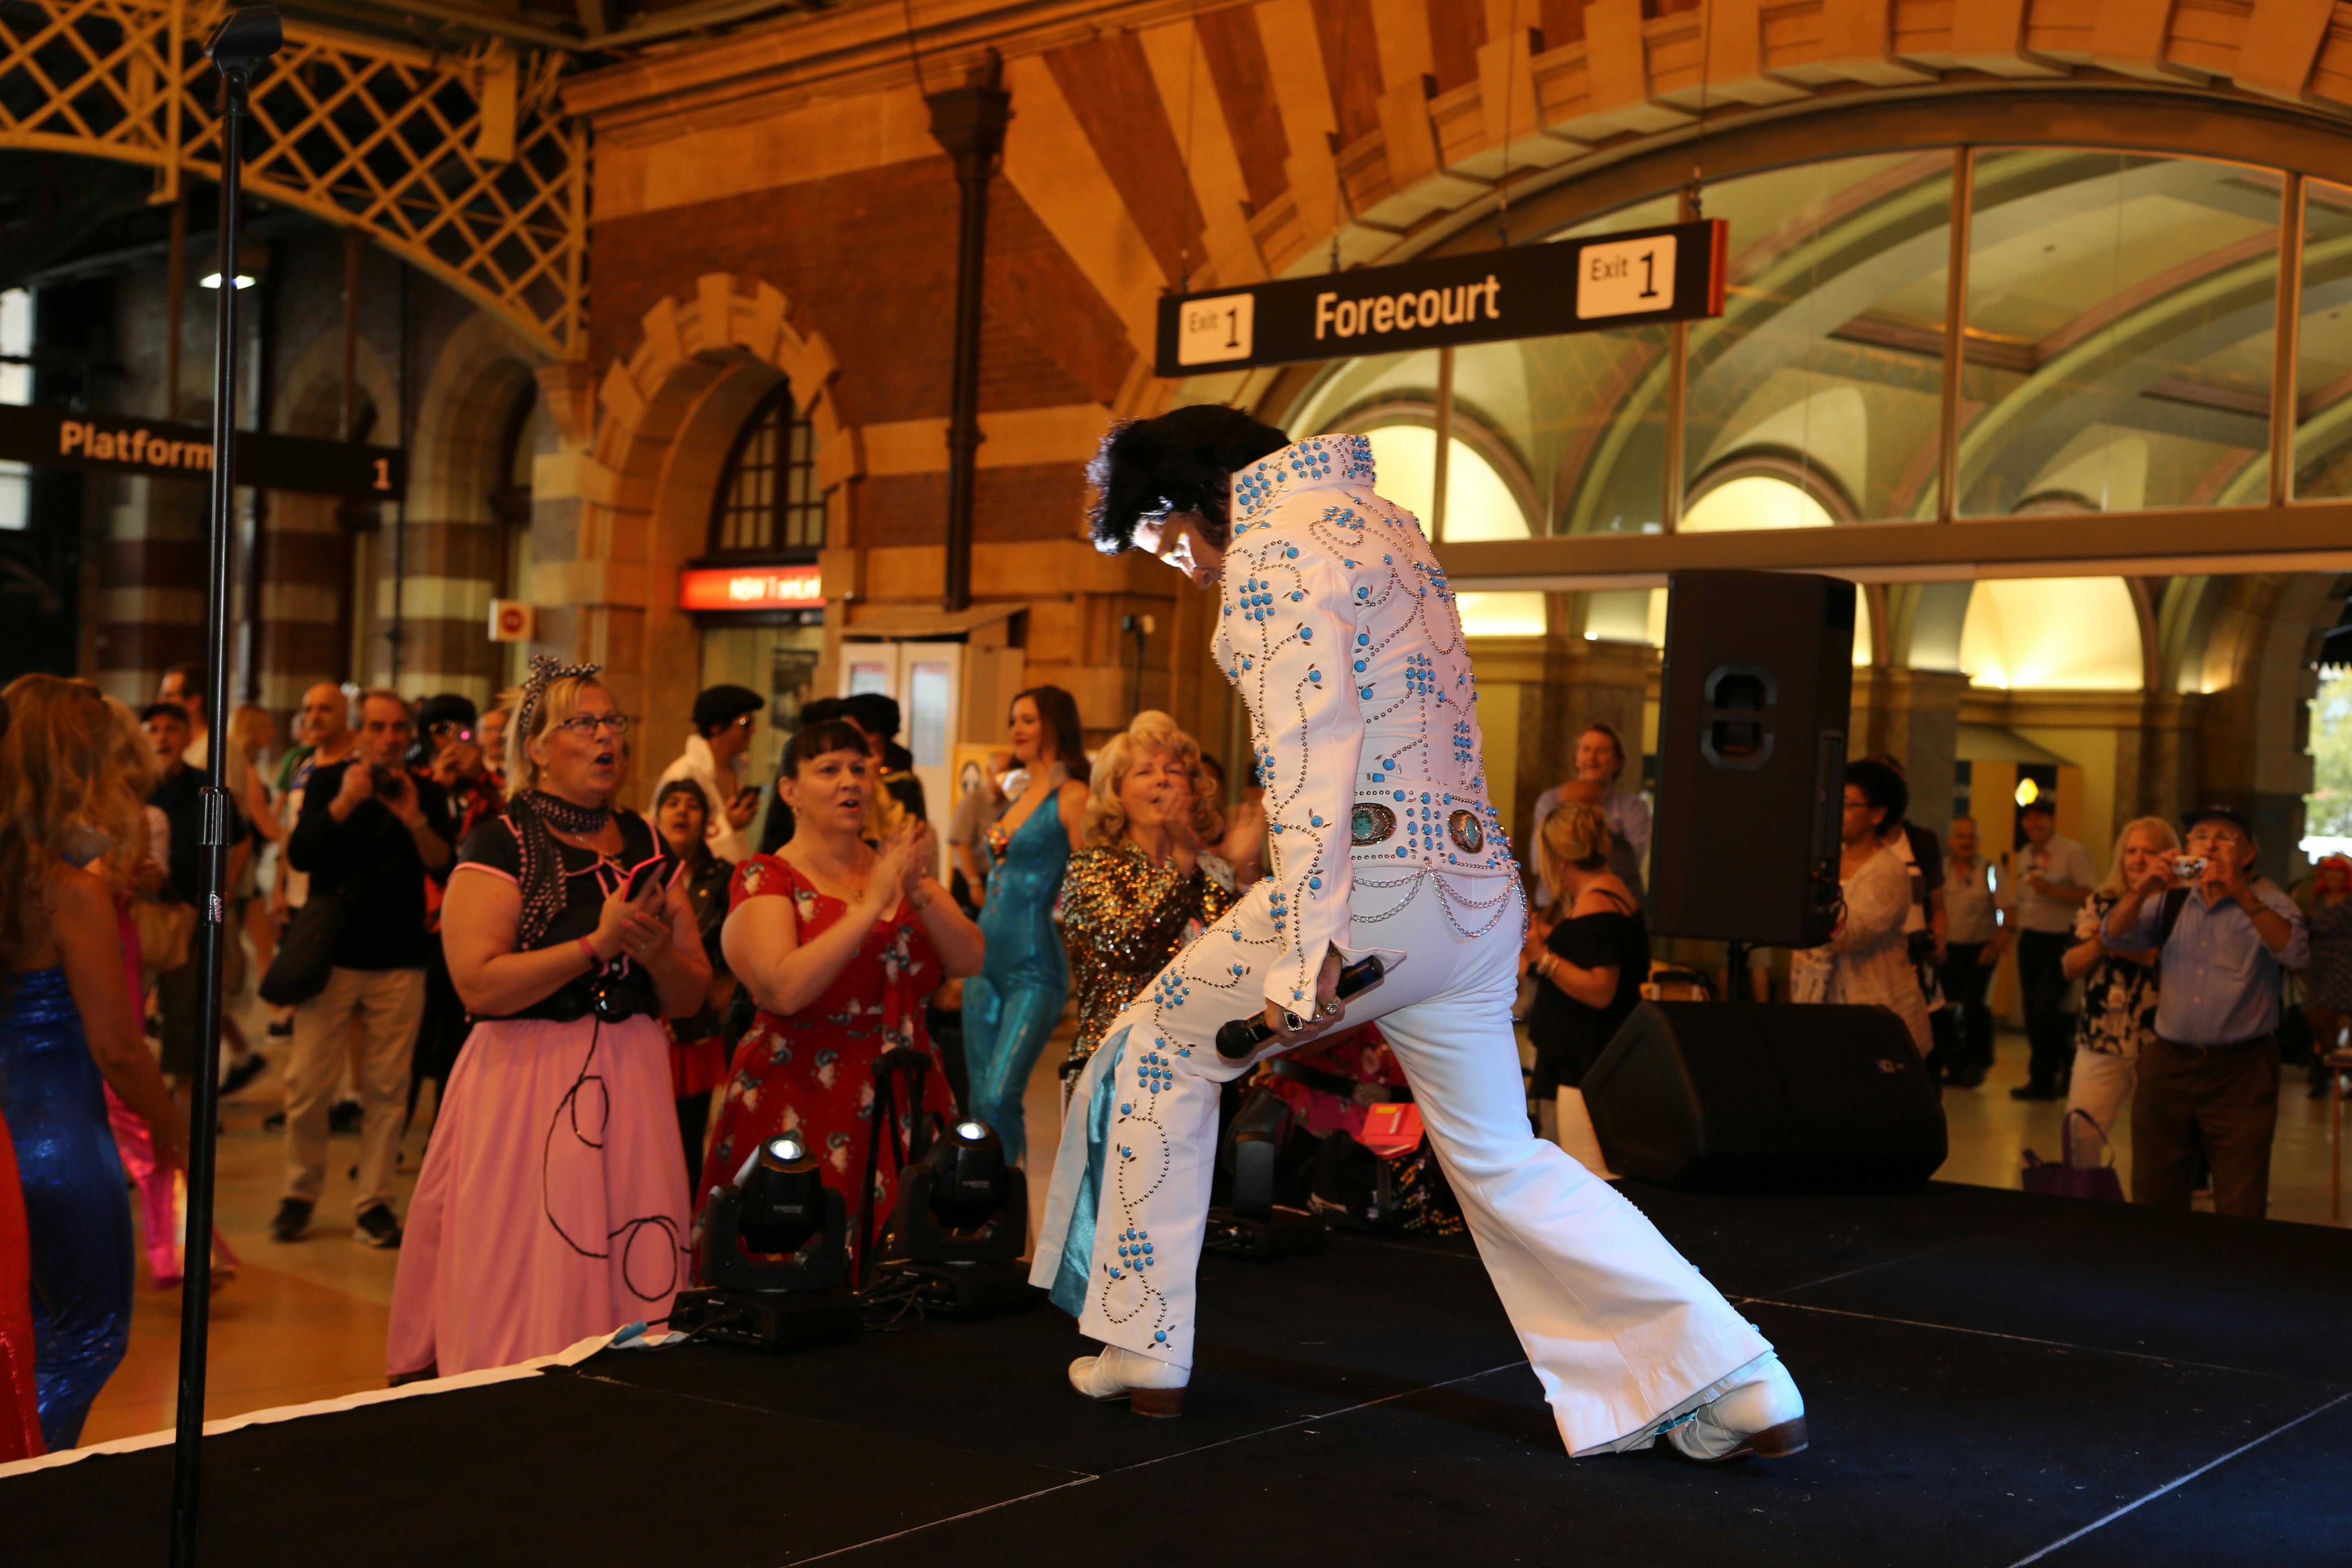 Thank you very much to the Parkes Elvis Festival